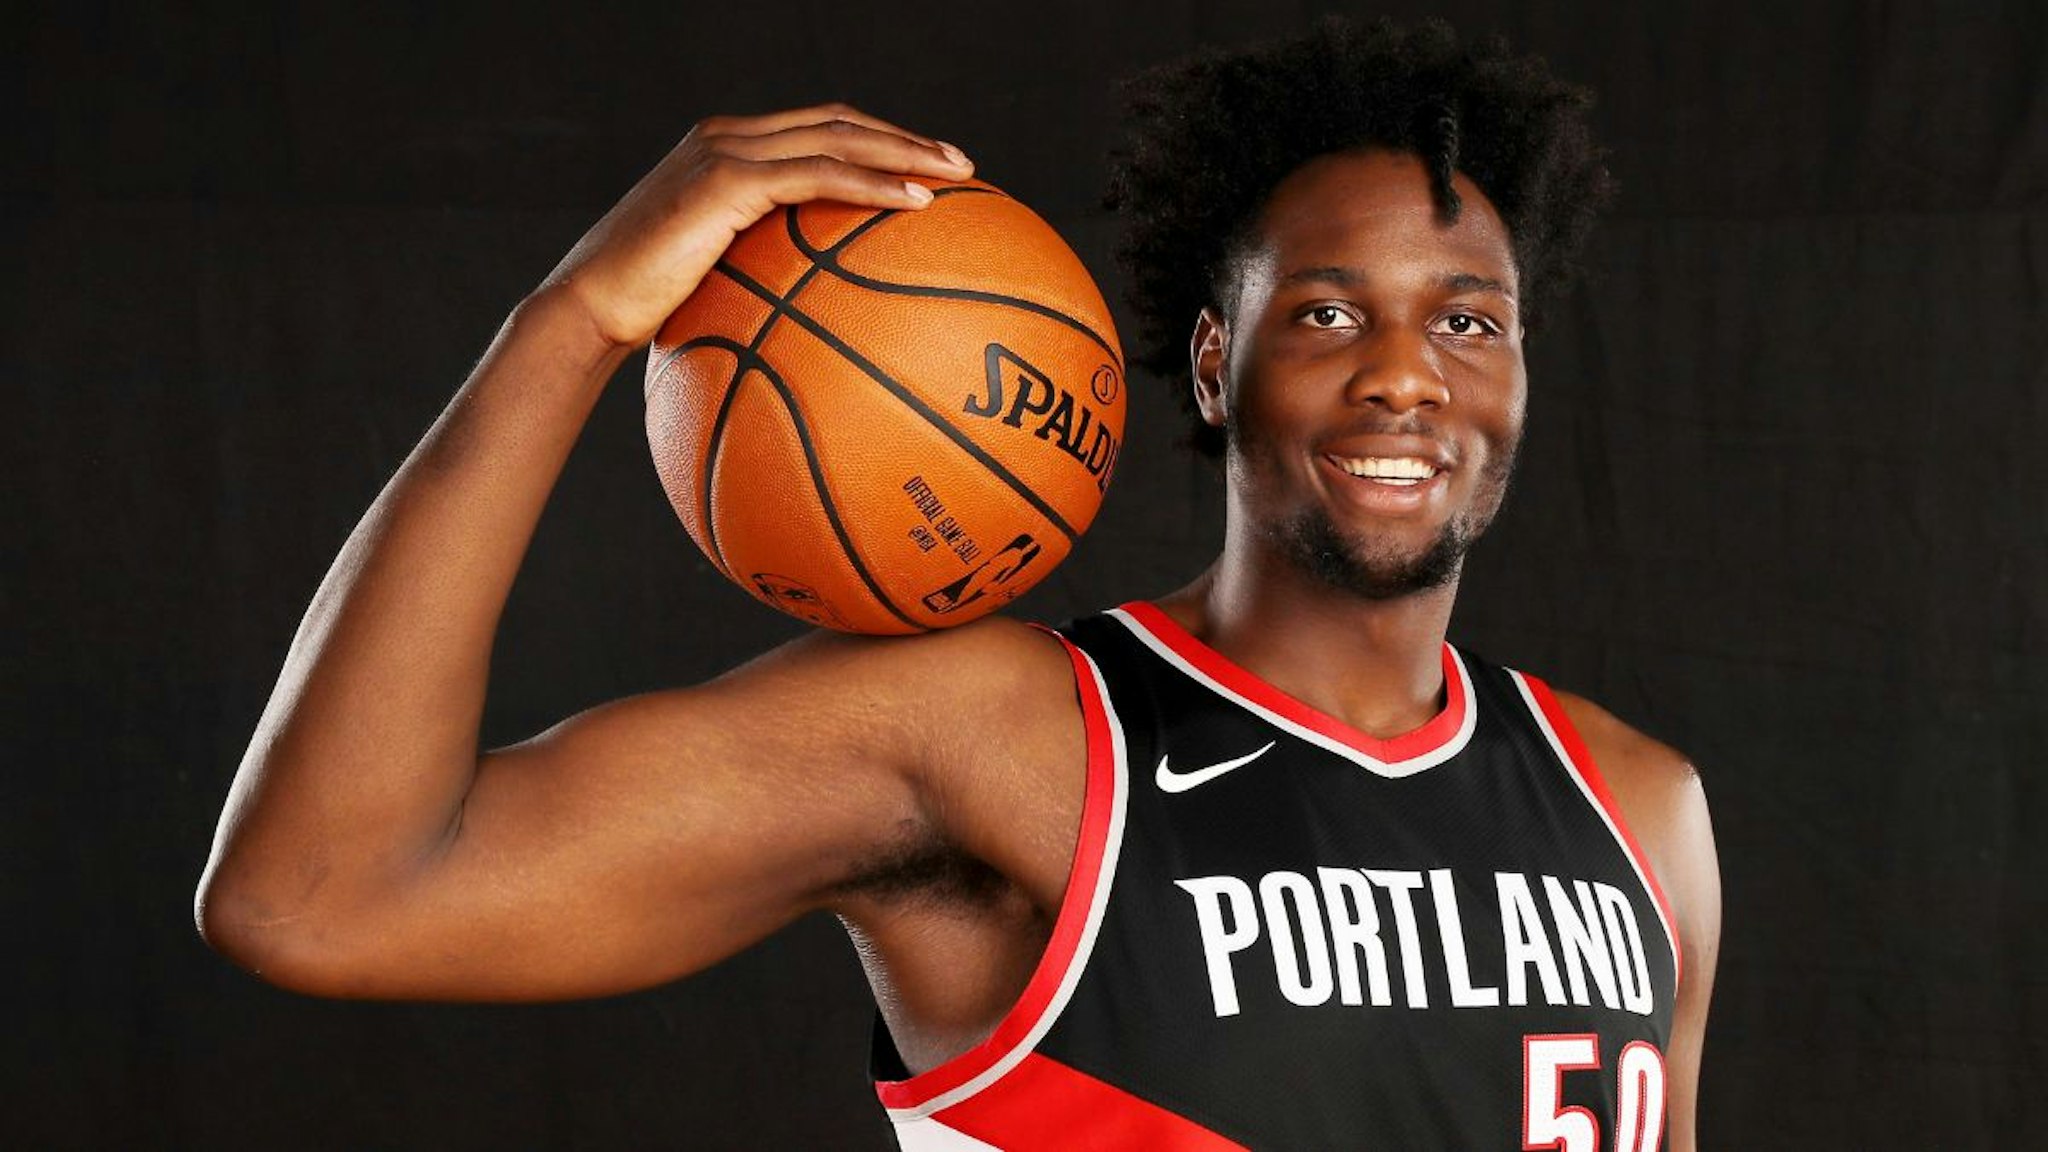 Caleb Swanigan of the Portland Trailblazers poses for a portrait during the 2017 NBA Rookie Photo Shoot at MSG Training Center on August 11, 2017 in Greenburgh, New York.